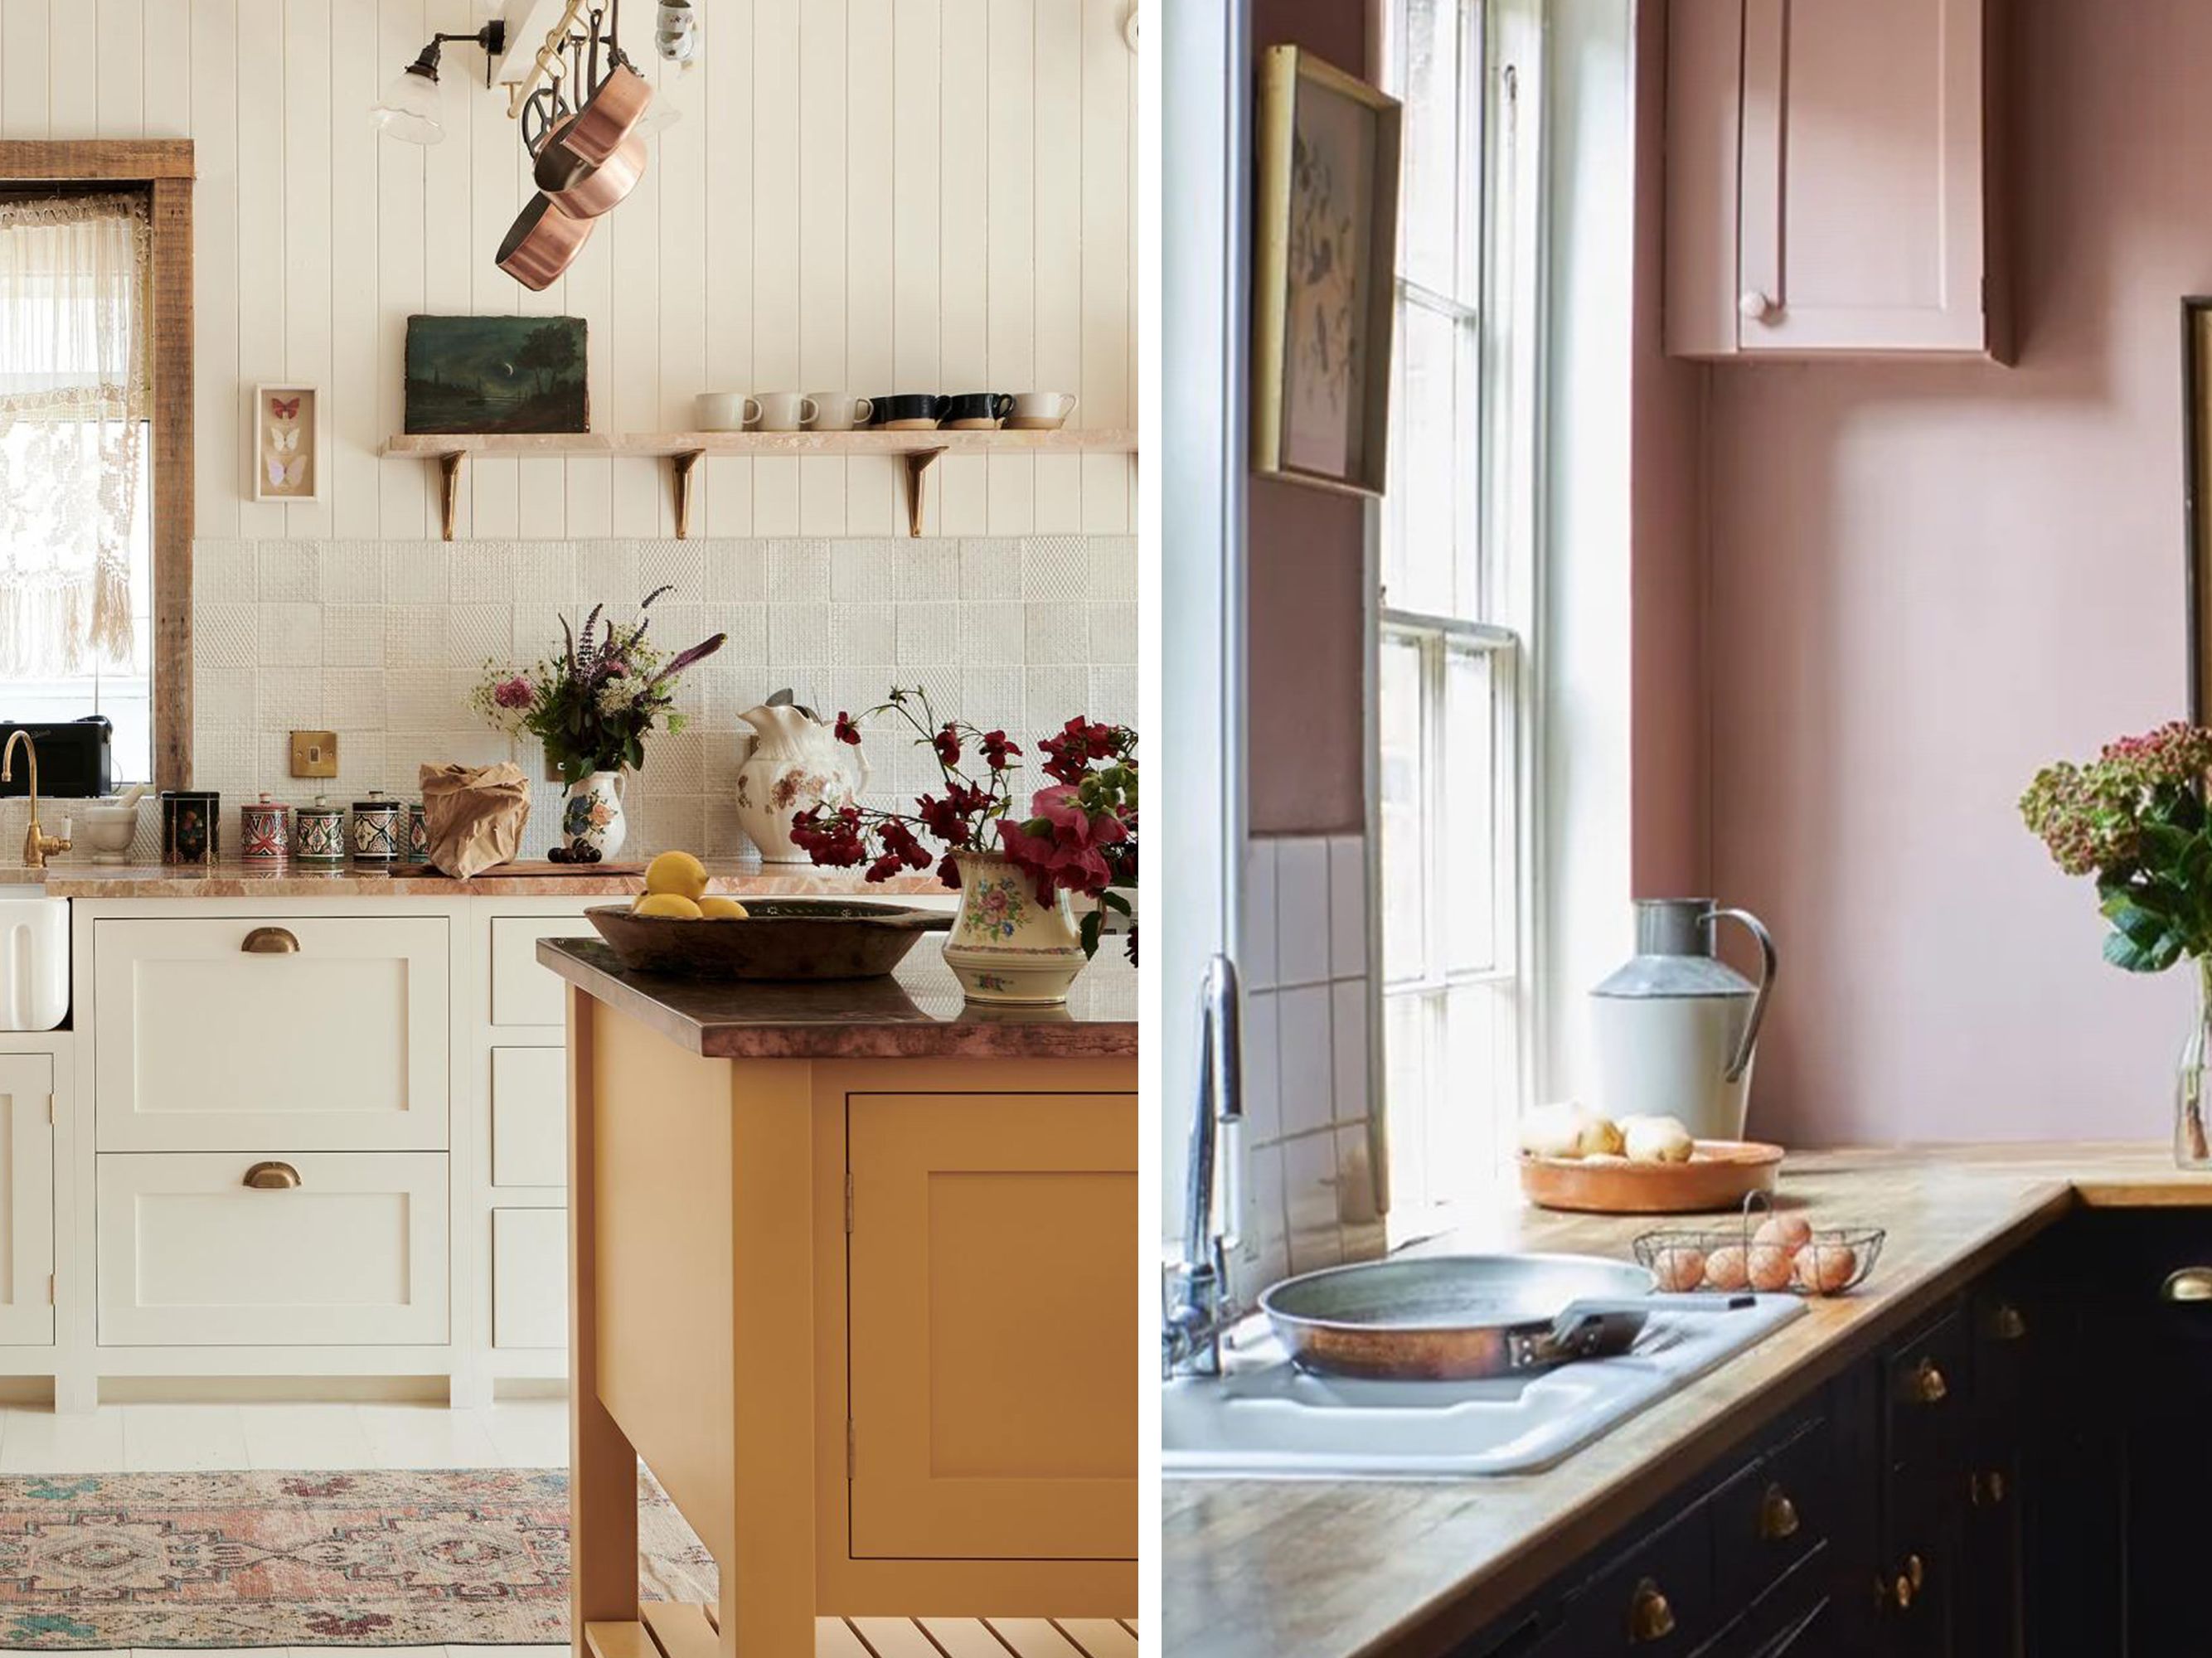 7 kitchen wall colors that will be popular in 2023 – and are loved by interior designers and decorators alike